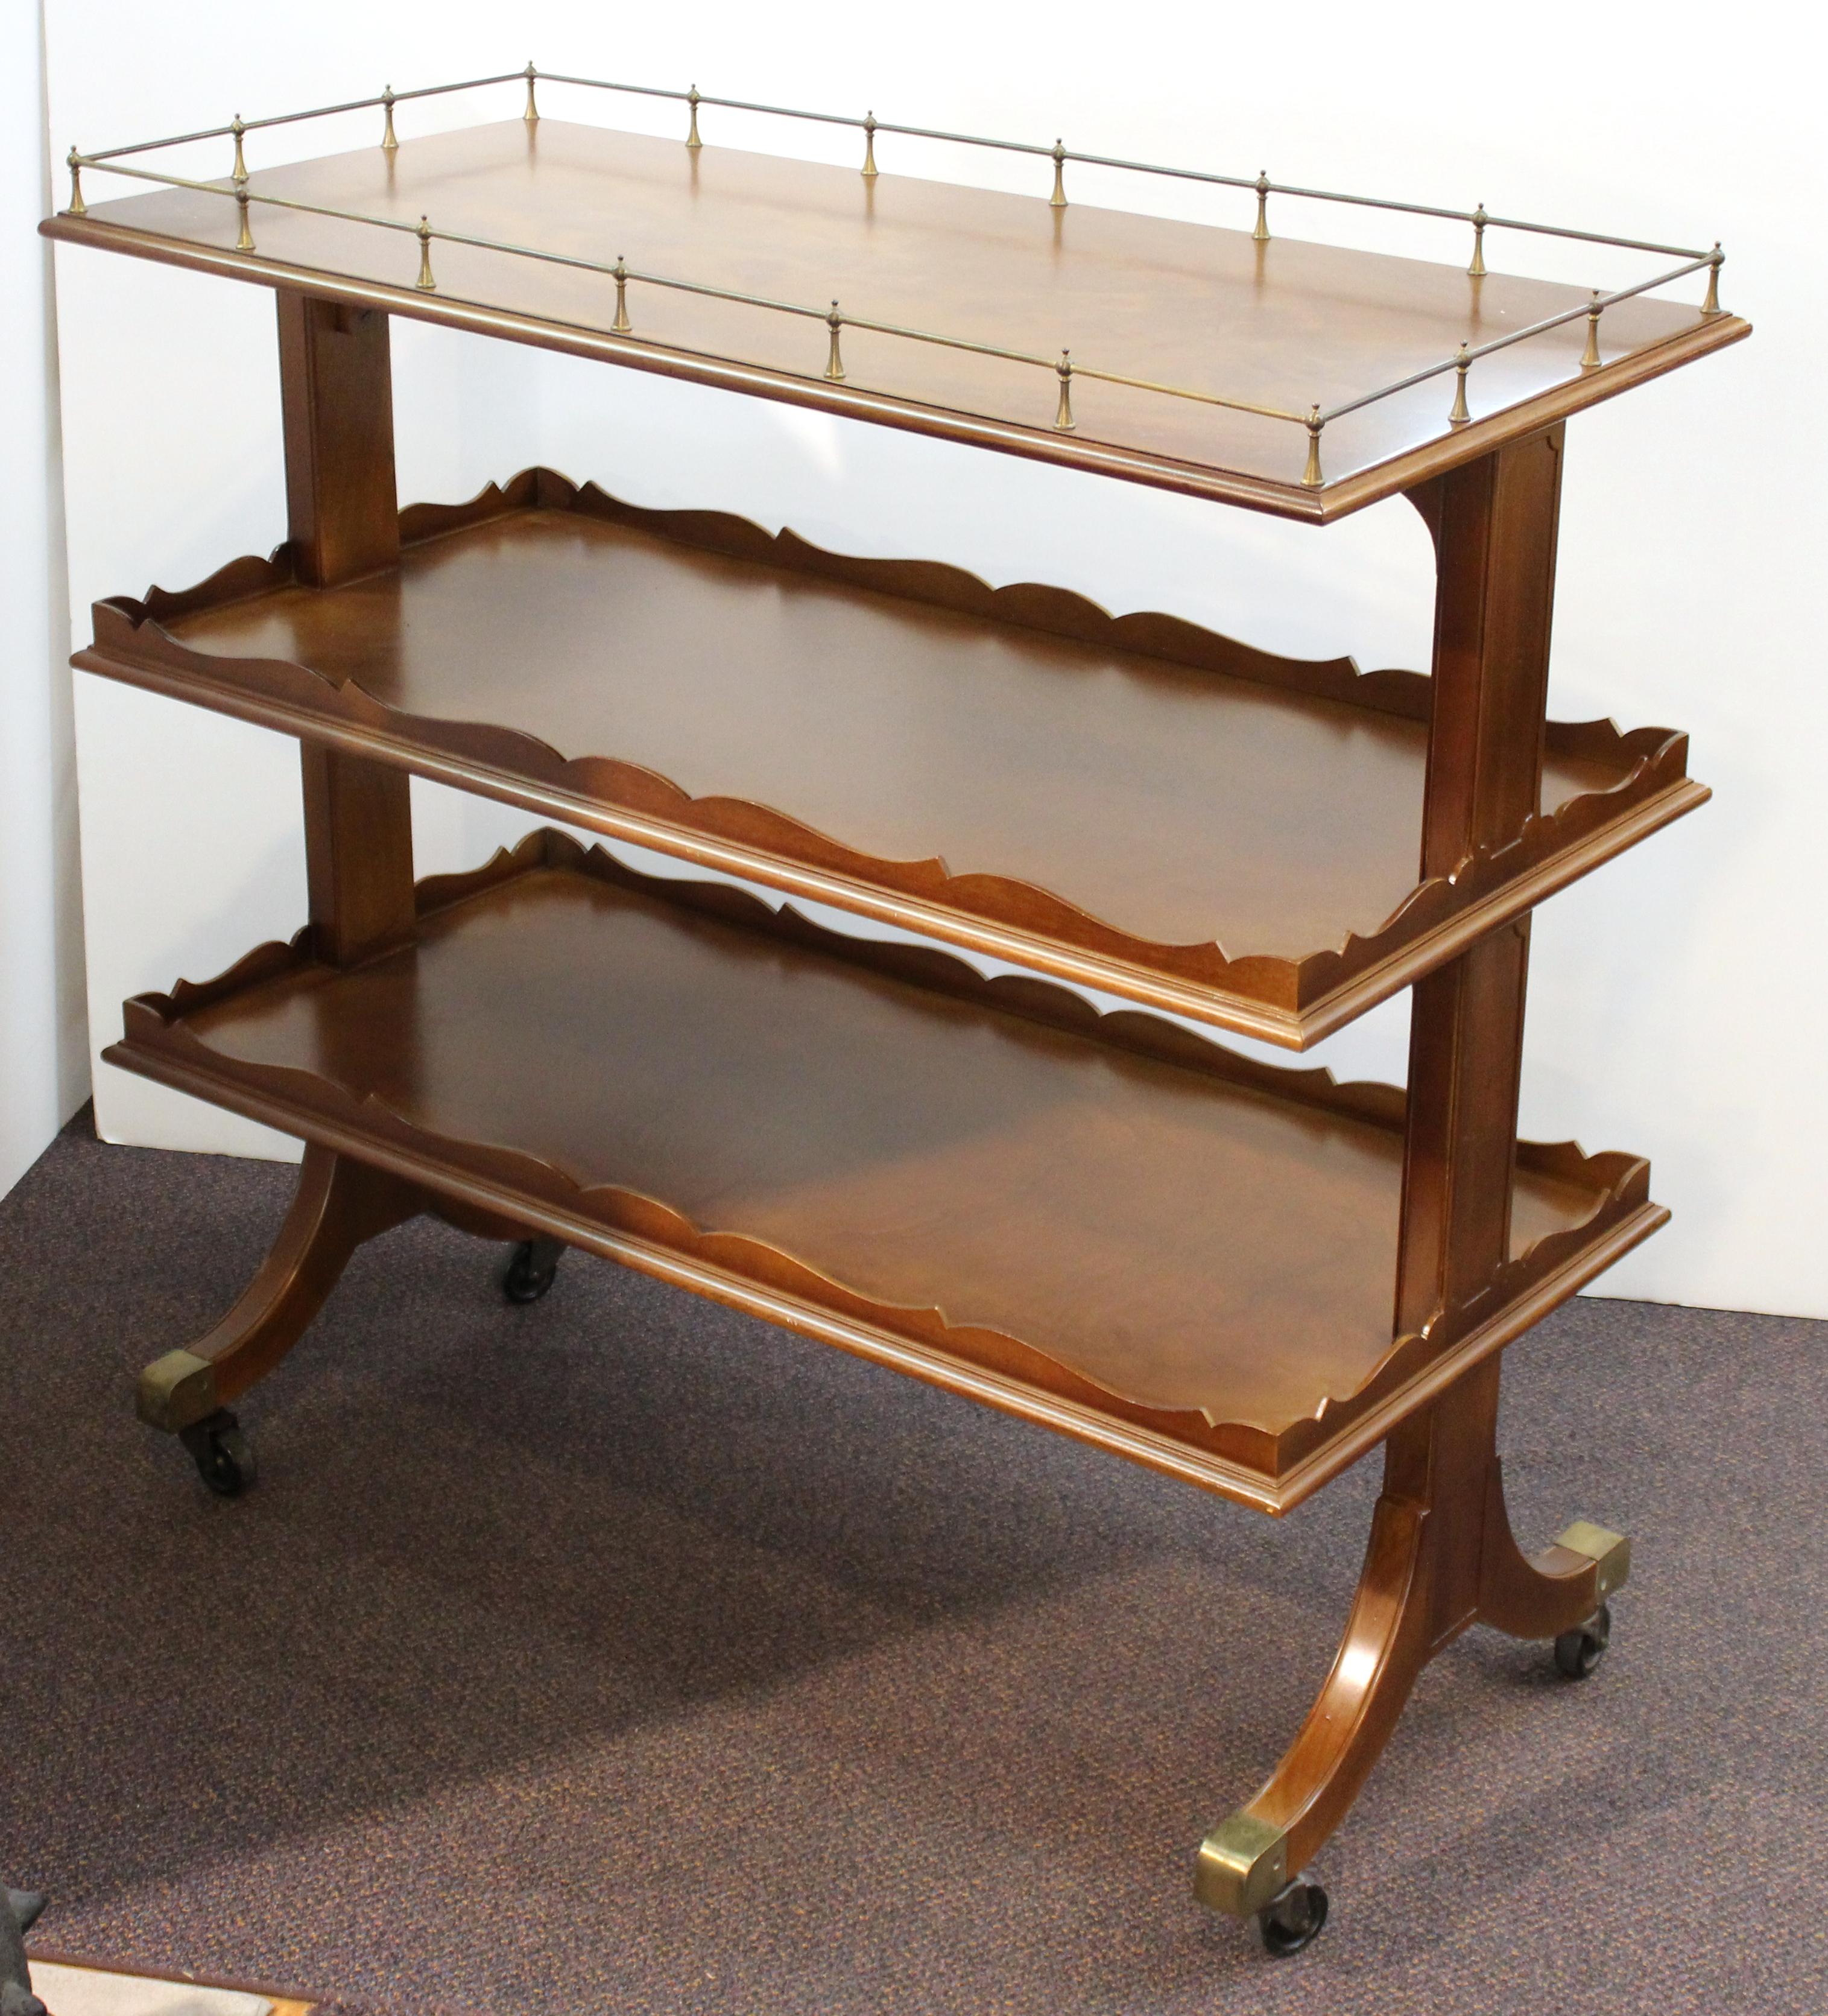 American Art Deco mahogany serving cart or bar cart designed by Grosfeld House during the 1940s. The cart has three tiers, stands on wheels and has been recently restored.